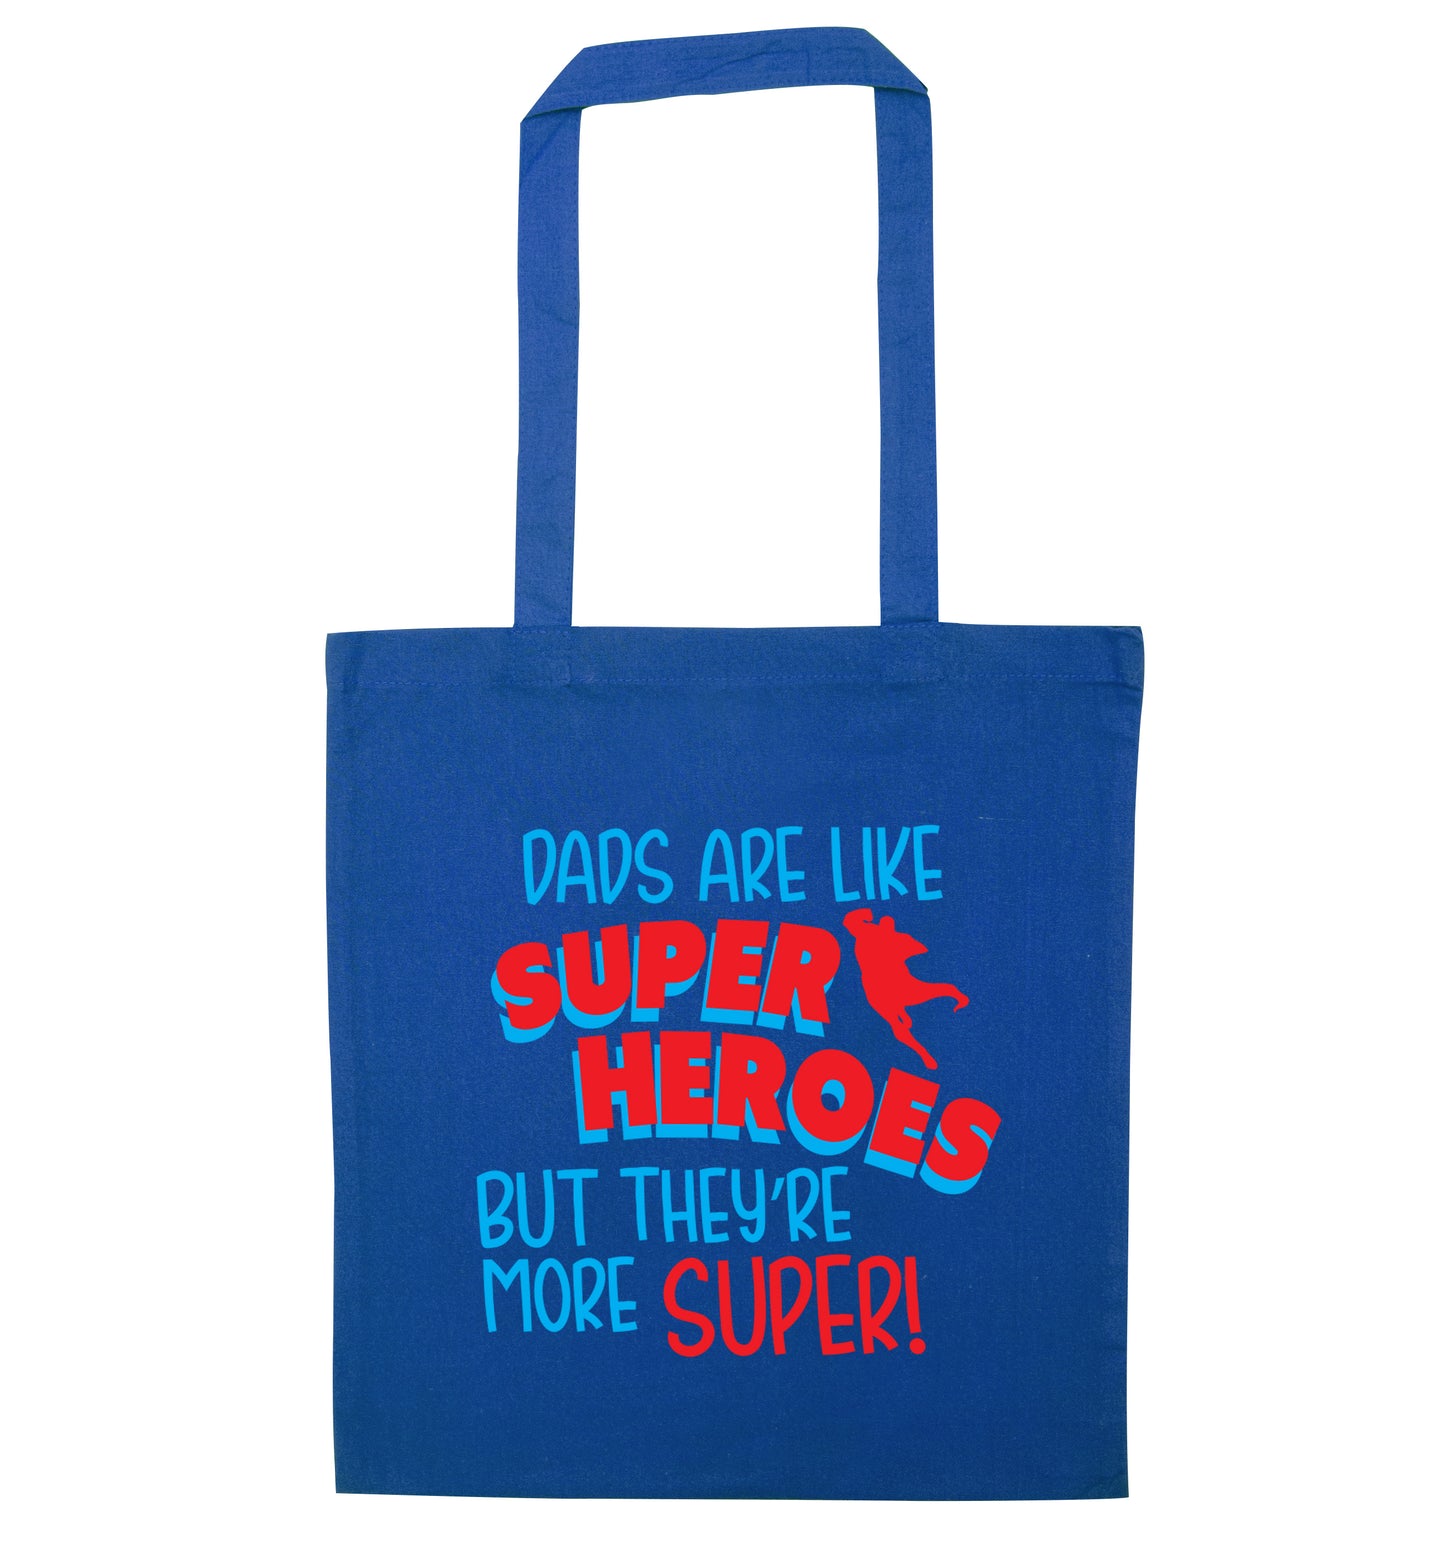 Dads are like superheros but they're more super blue tote bag